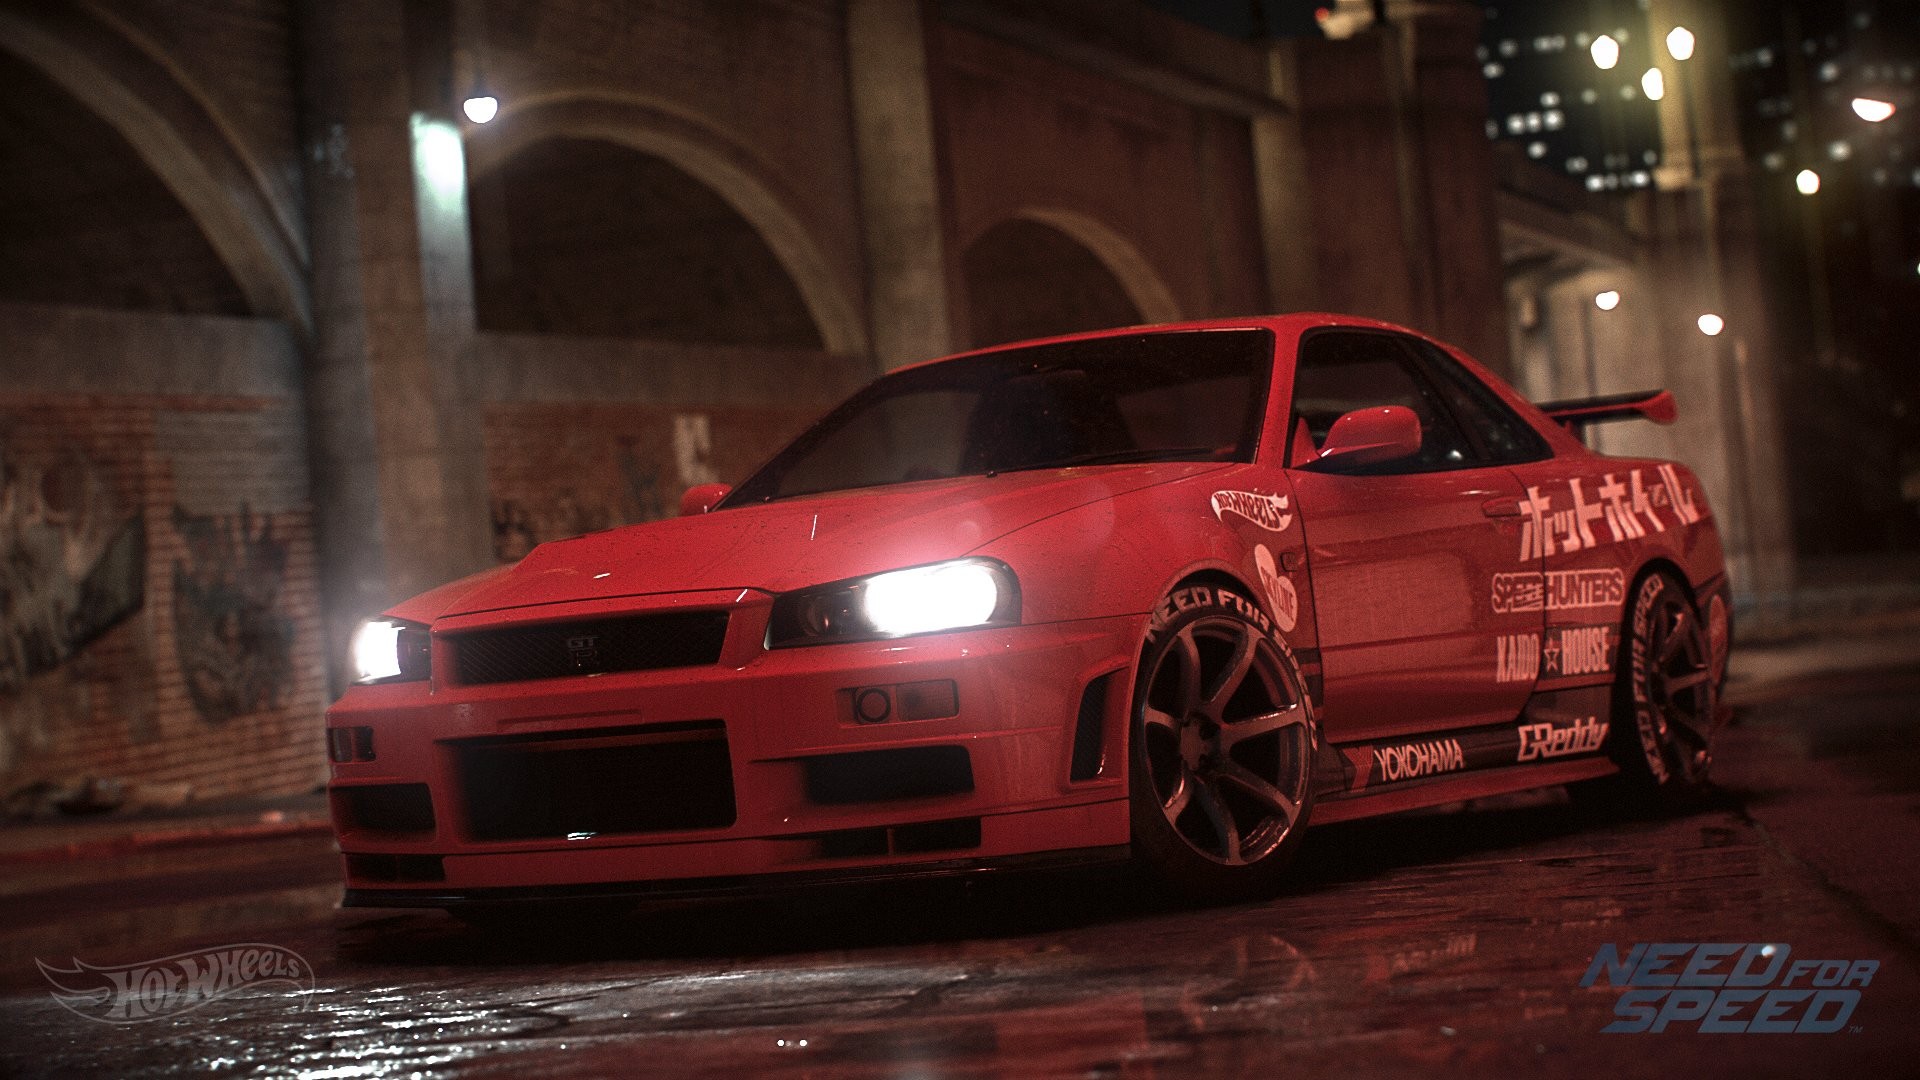 Need for Speed, Nissan Skyline GT R R34, Car Wallpaper